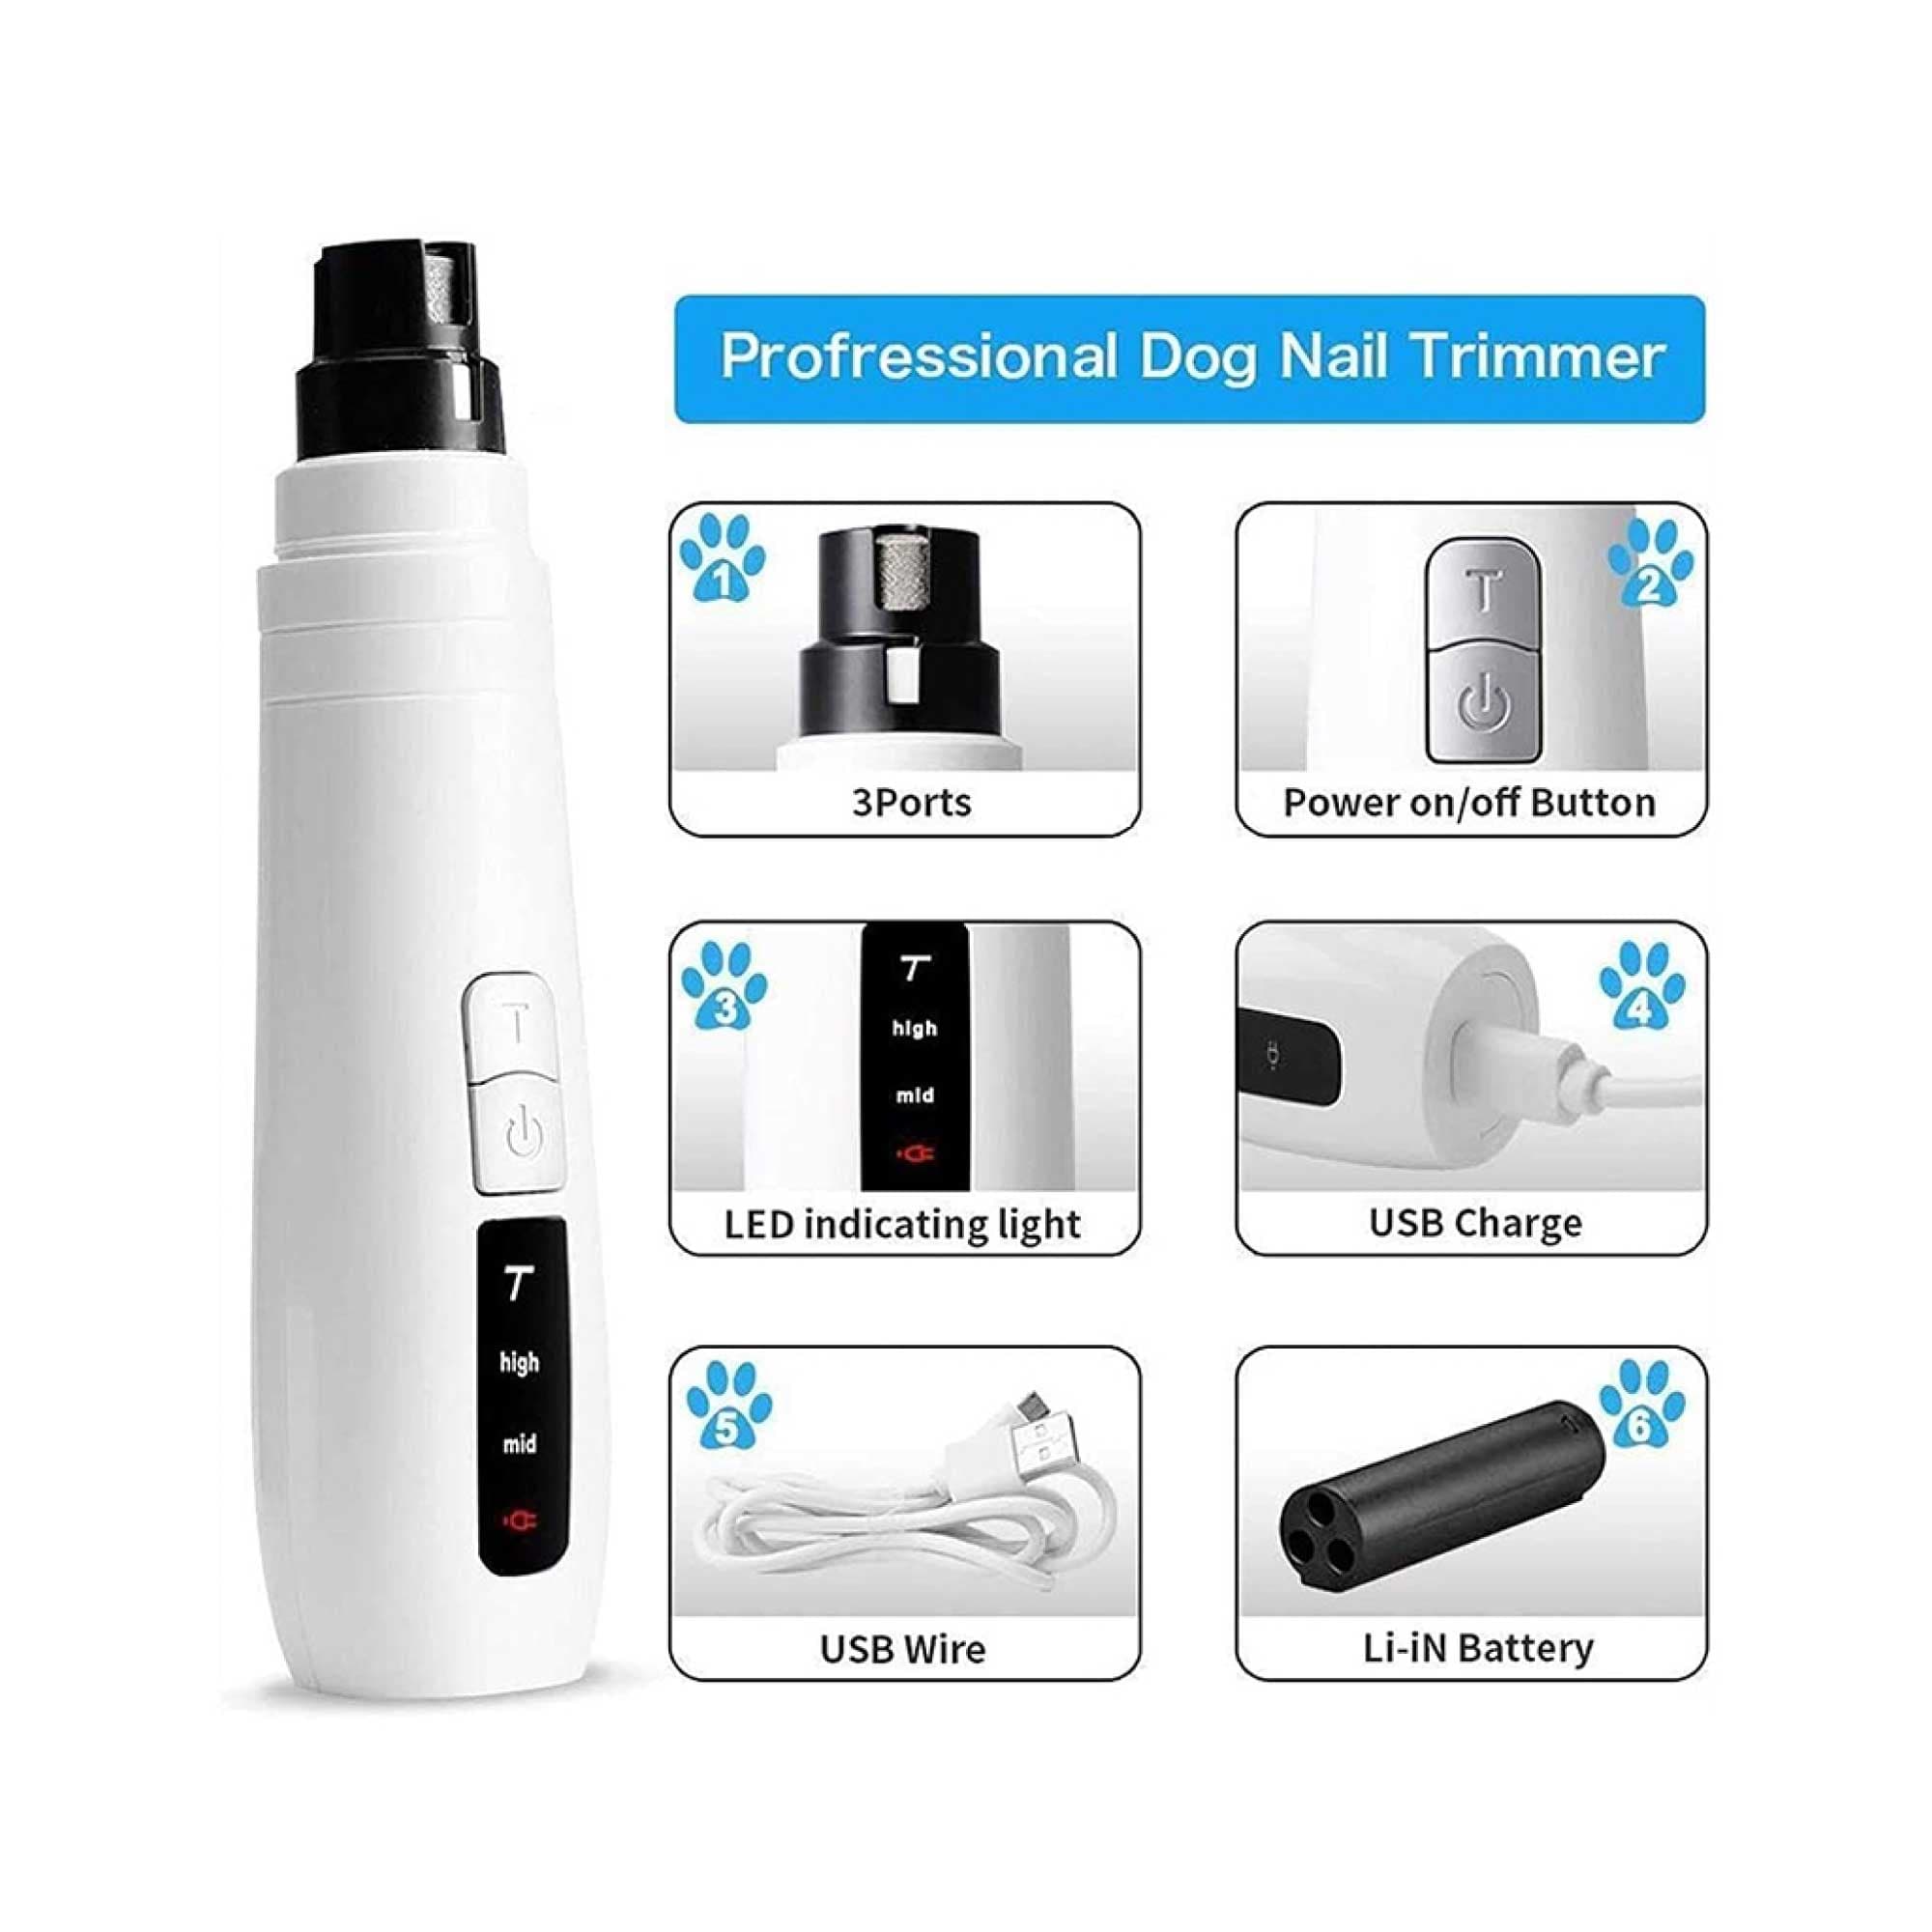 Pet Nail Grinder for Dogs and Cats - Turbo Electric Trimmer